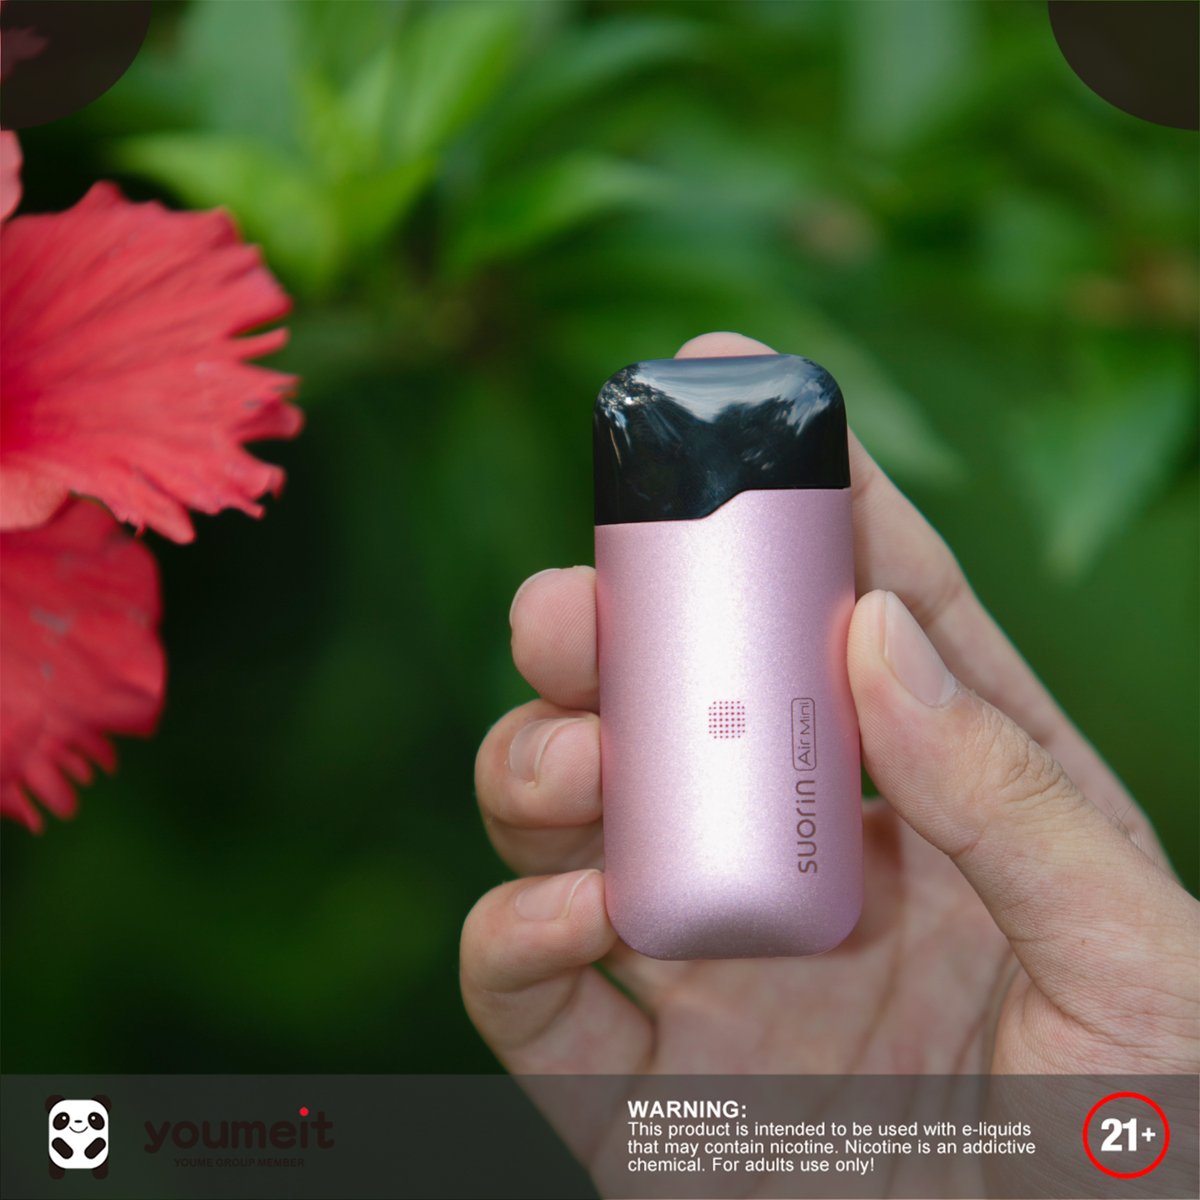 #Suorinairmini
trendy， beautiful, and soft rose gold color, compatible with feminine☺️☺️☺️

Warnings: This product is only for adults.

#youmeit #suorinarmini #vape #vapeit #colors #liquid #vapecommunity